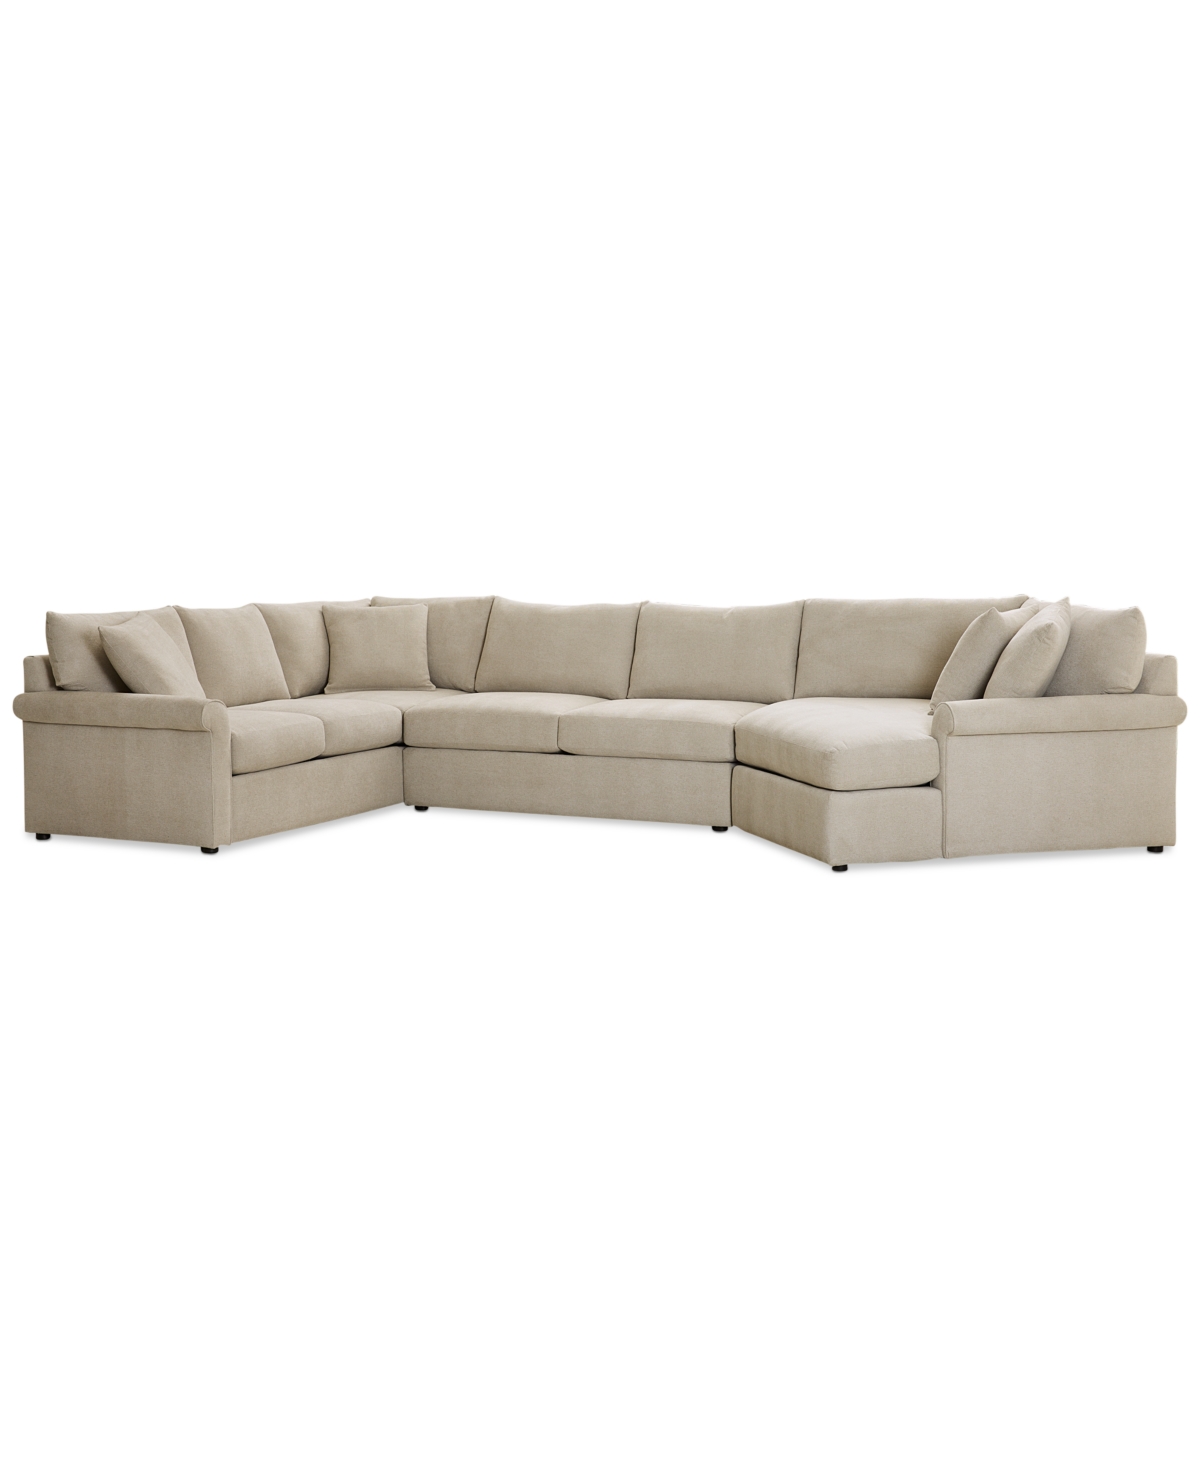 Furniture Wrenley 170" 3-pc. Fabric Sectional Cuddler Chaise Sofa, Created For Macy's In Dove